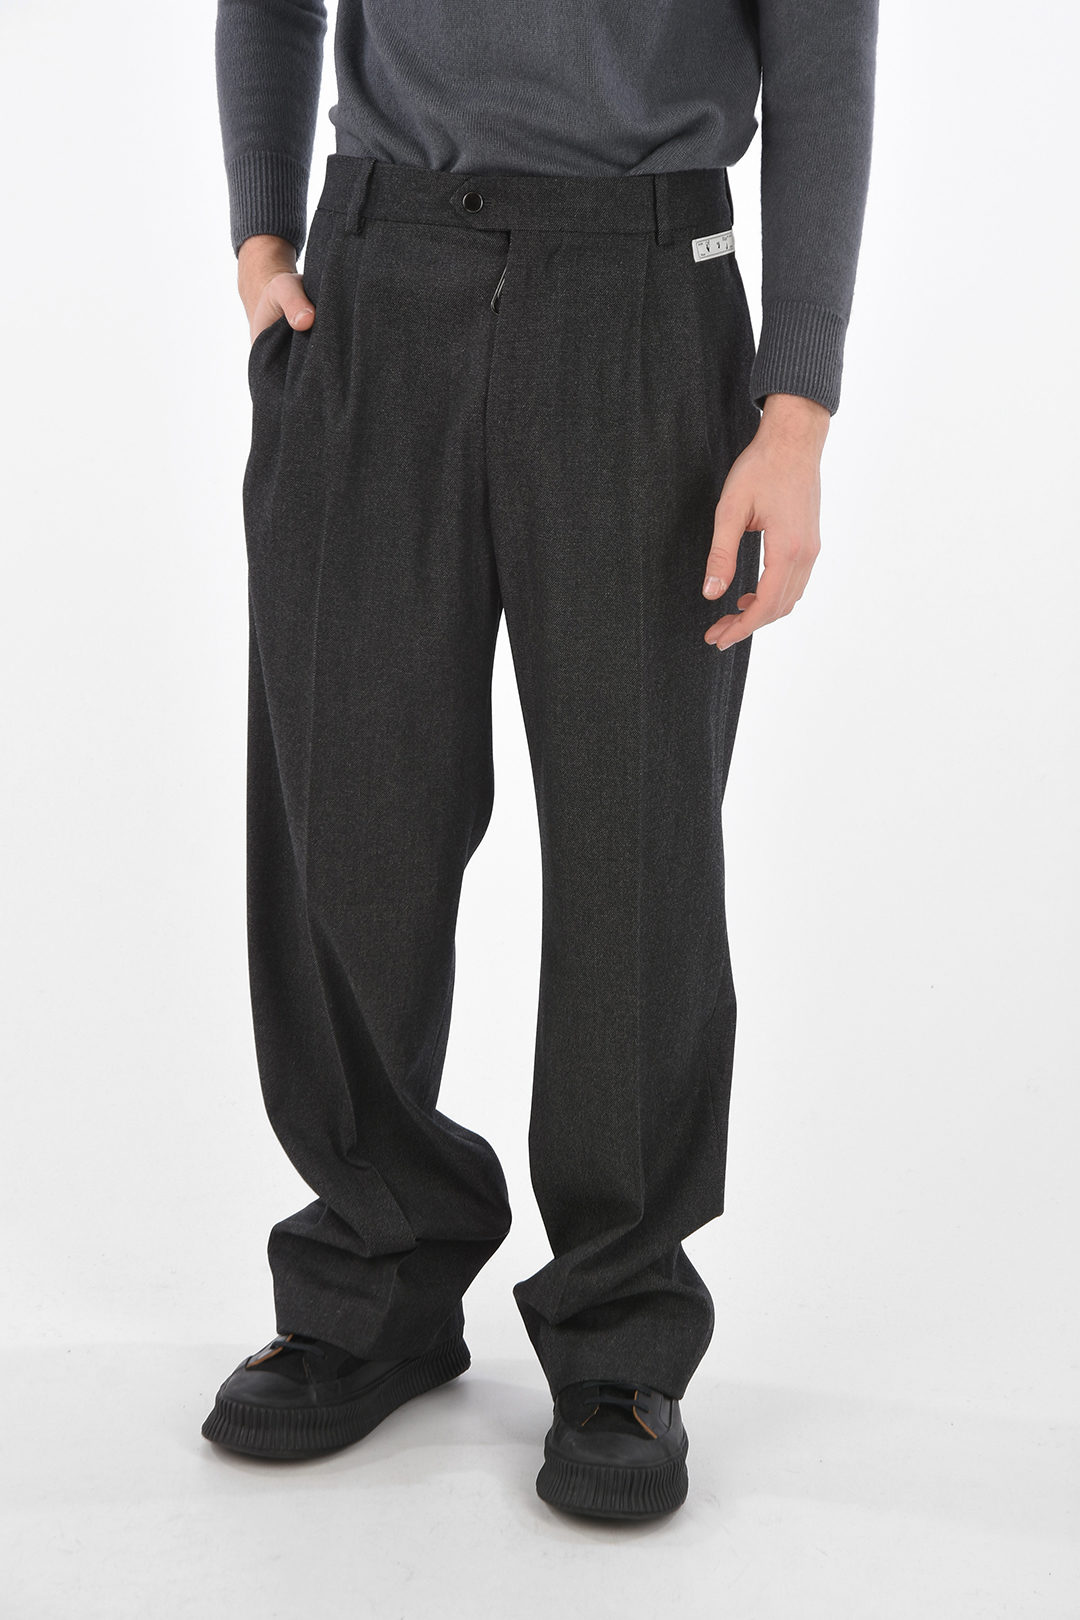 Parages Double Pleats Wool Pants in Dark Grey Melange | Wallace Mercan –  Wallace Mercantile Shop